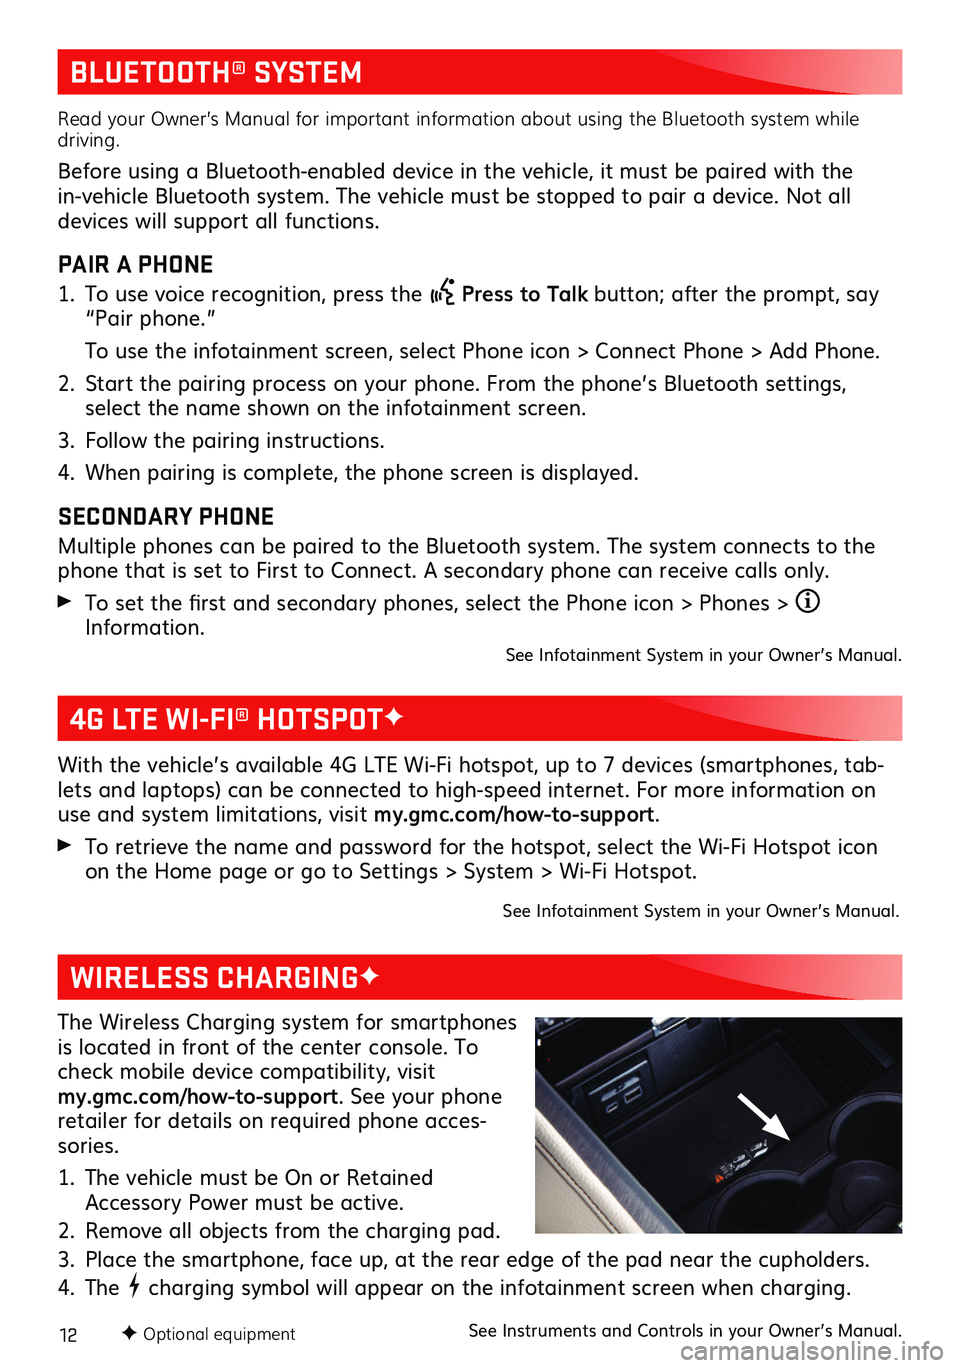 GMC YUKON 2021  Get To Know Guide 12
BLUETOOTH® SYSTEM
Read your Owner’s Manual for important information about using the Bluetooth system while driving.
Before using a Bluetooth-enabled device in the vehicle, it must be paired wit